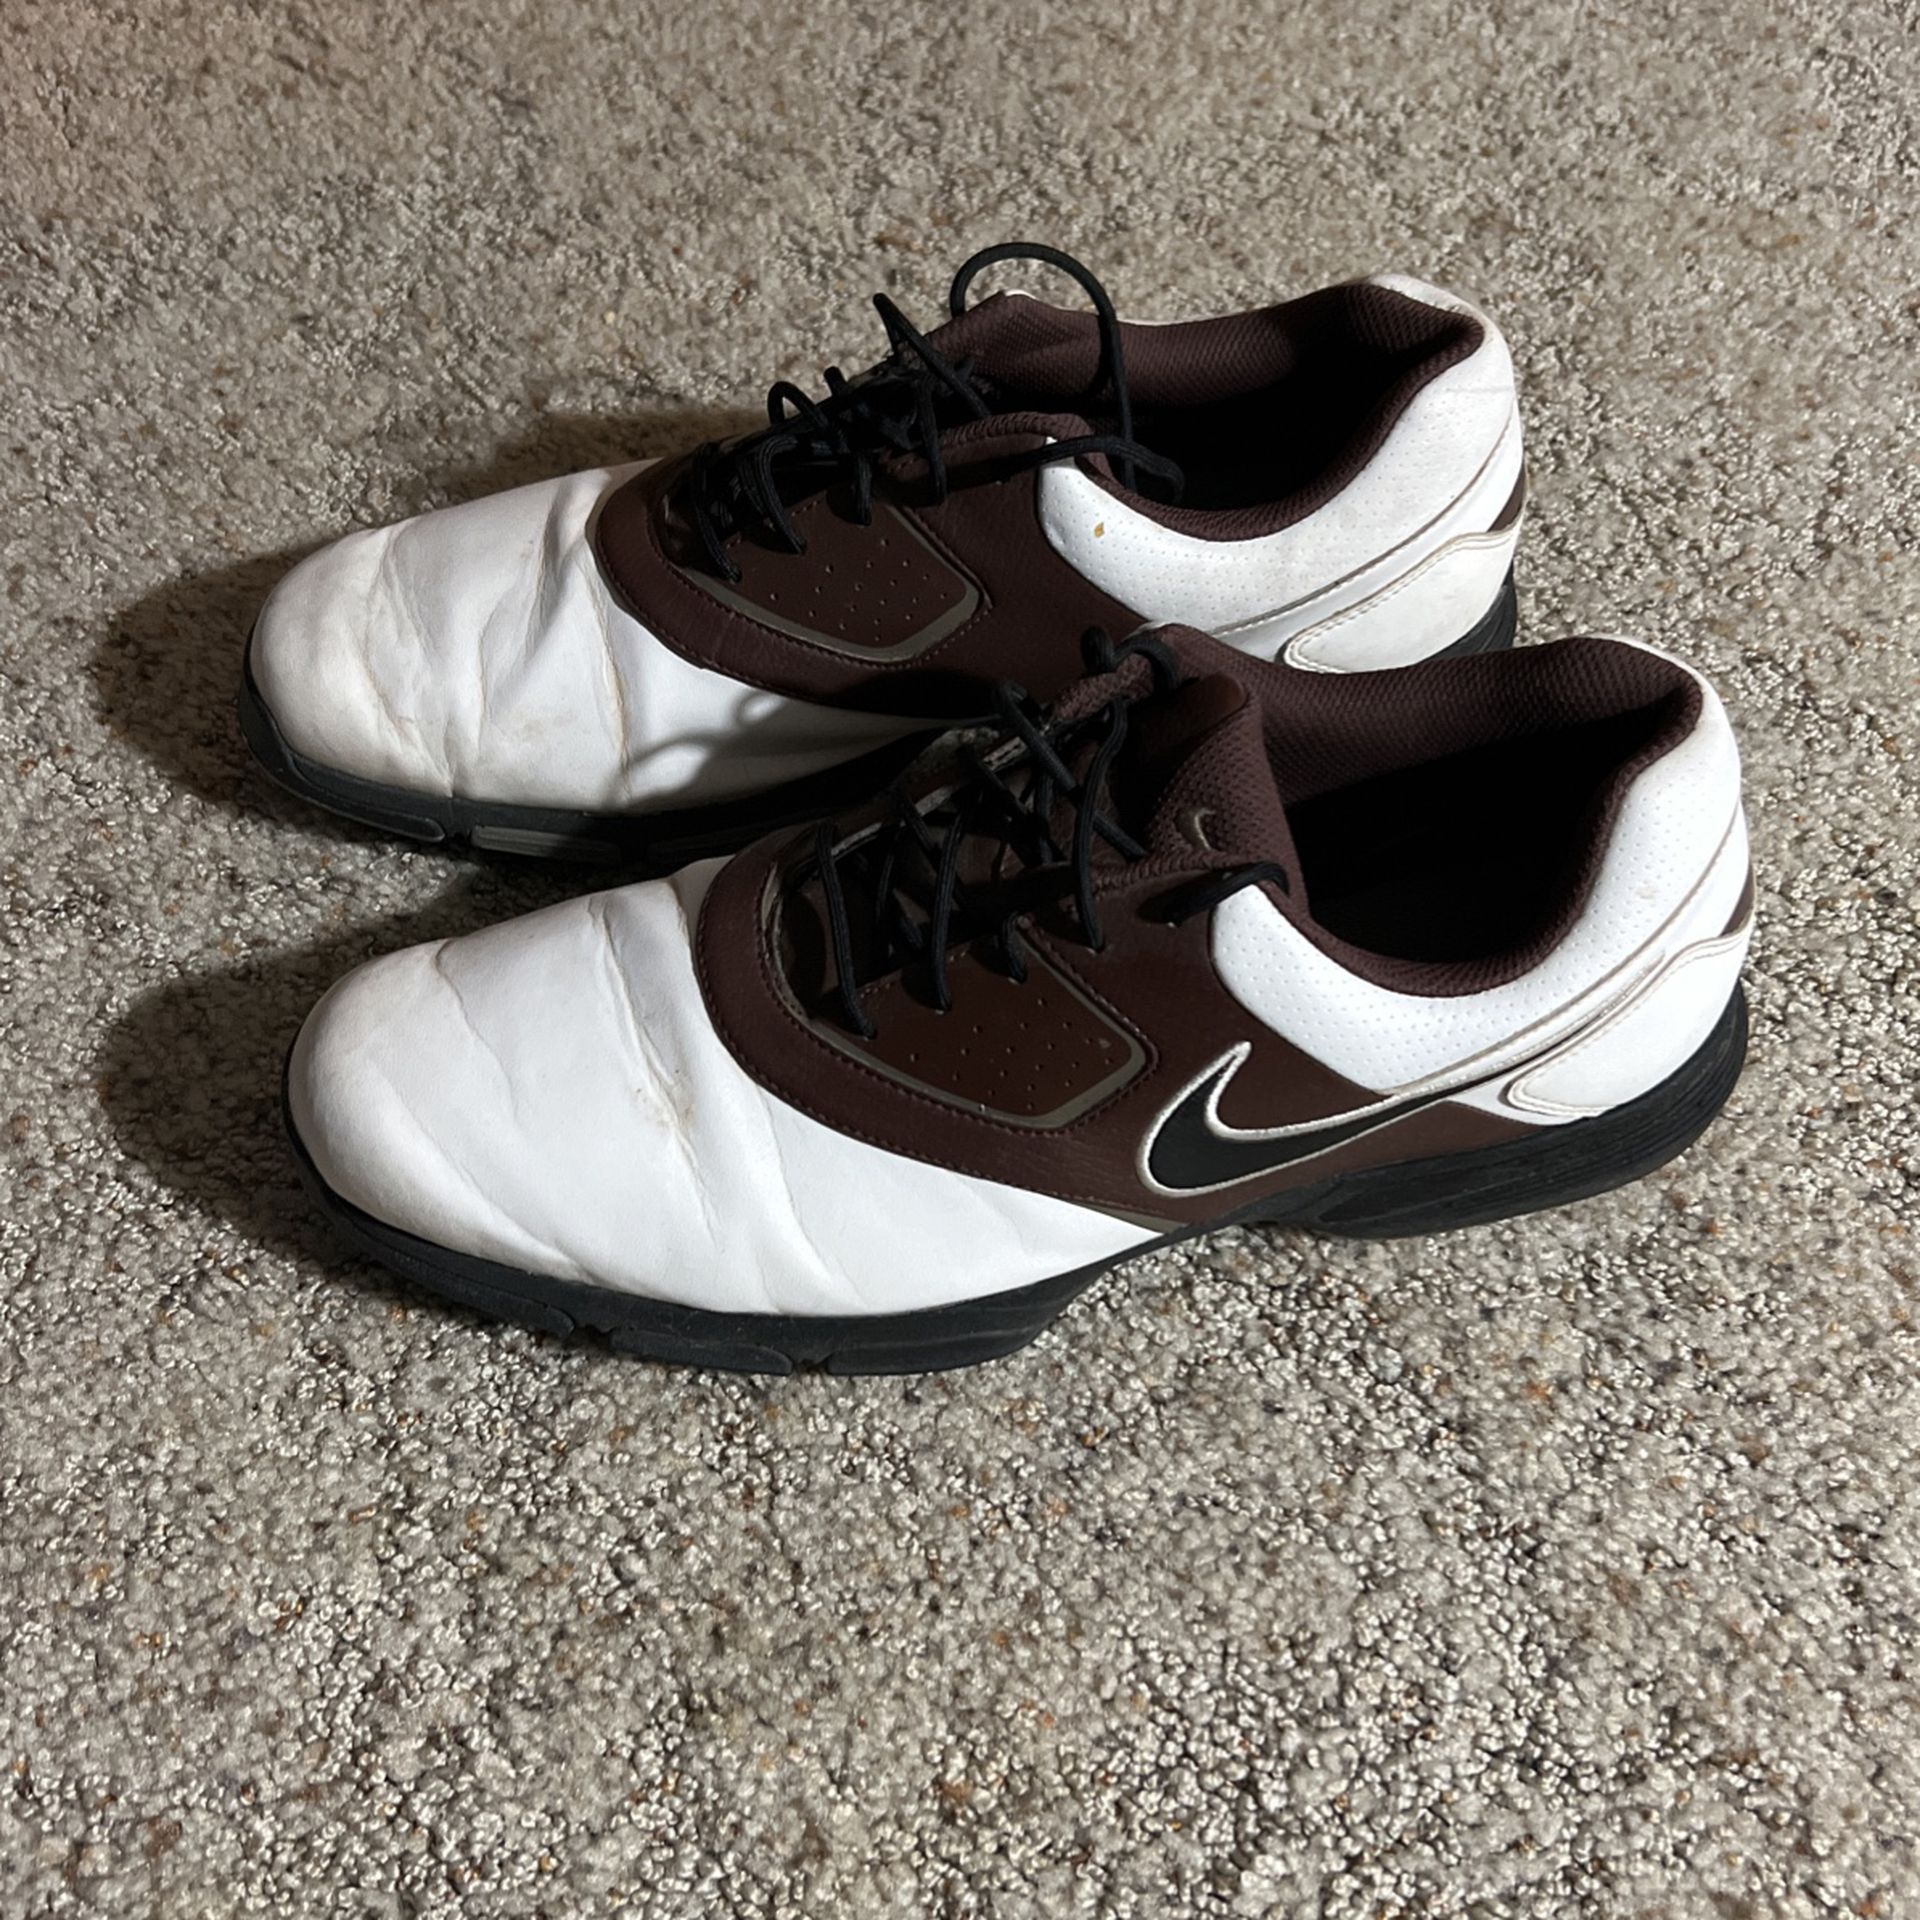 Mens Nike Golf Shoes Size 11 1/2